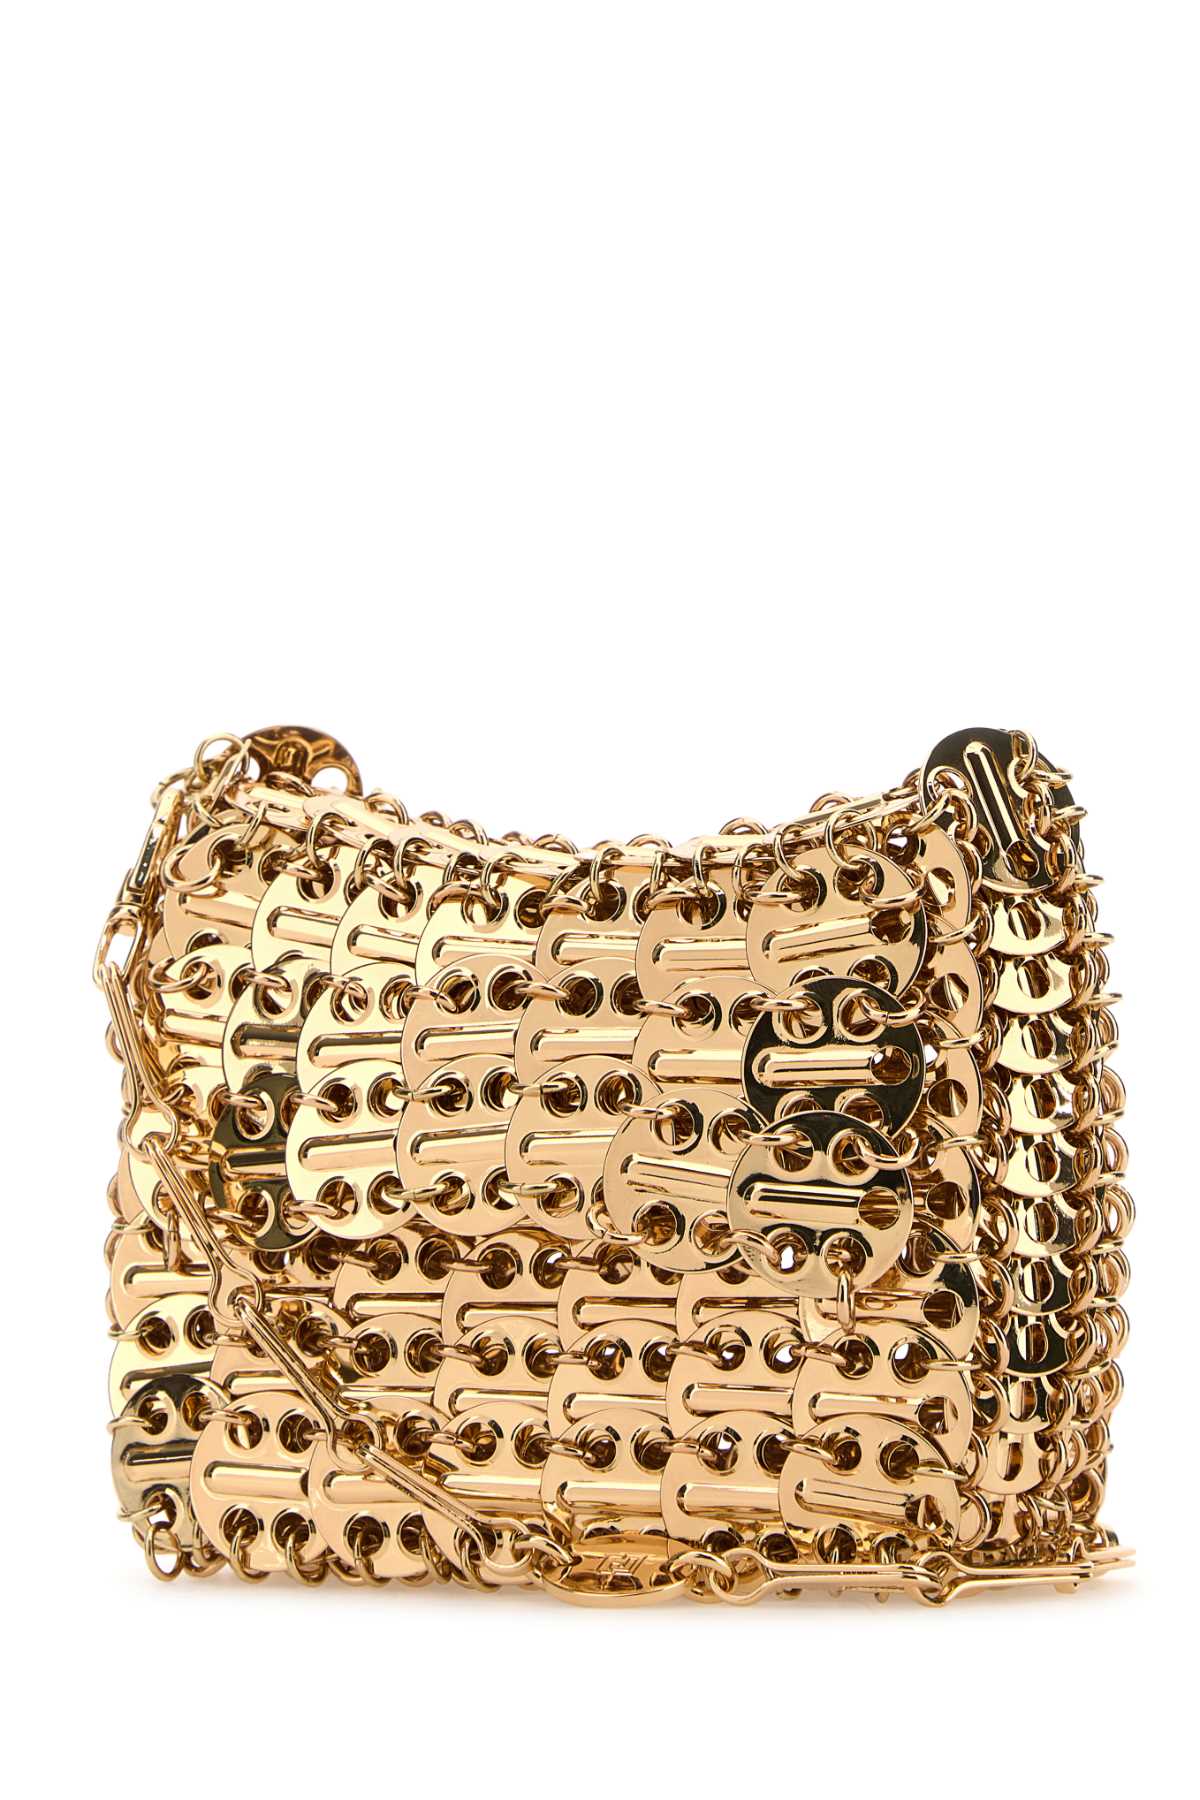 Paco Rabanne Gold Chain Mail Shoulder Bag In Lightgold